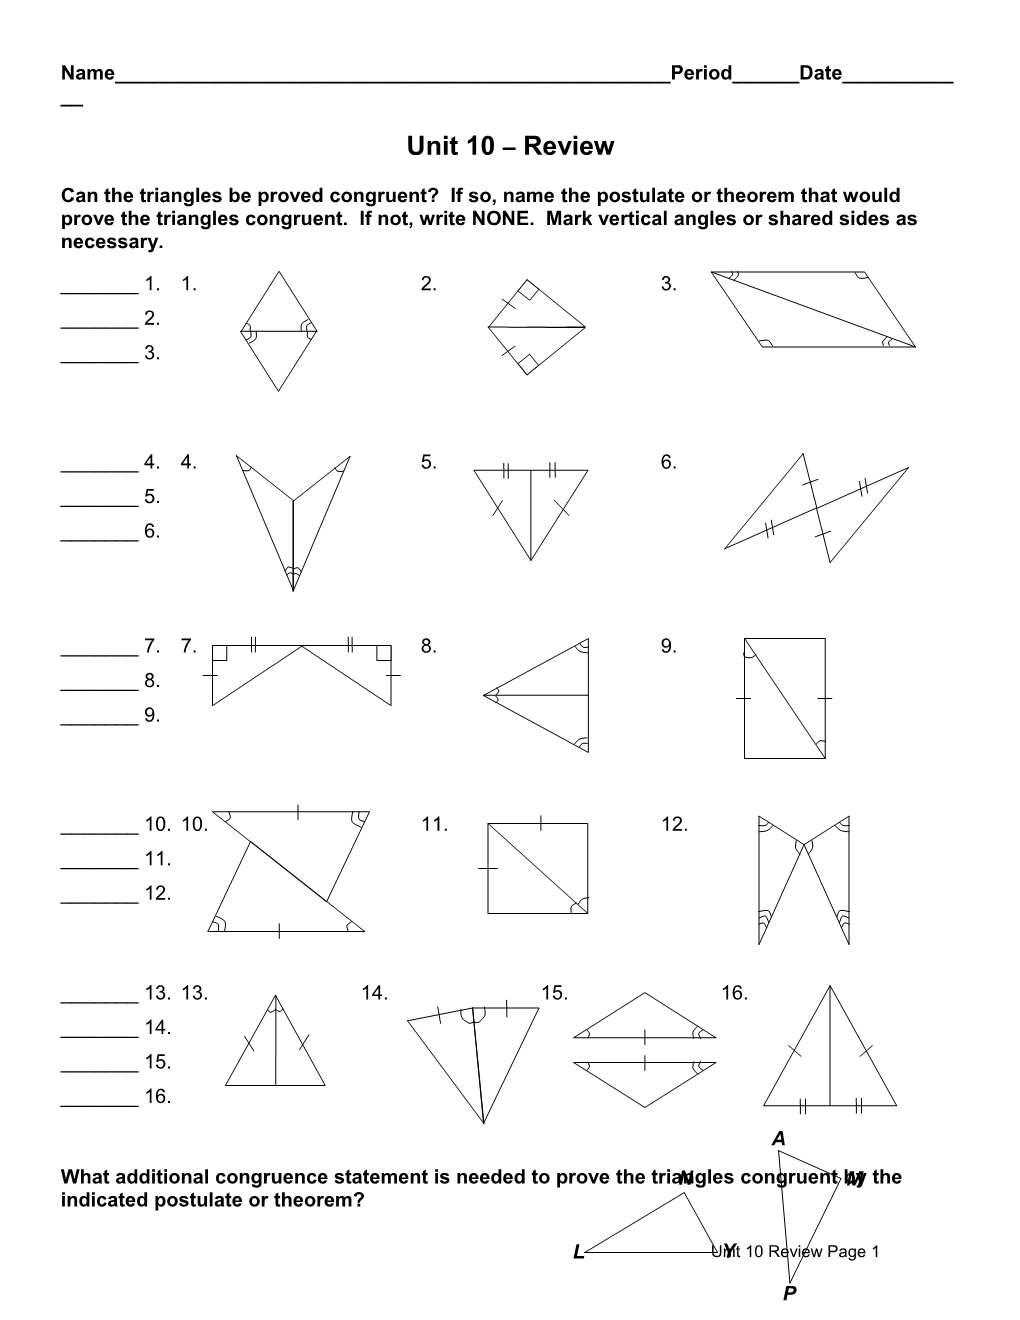 Can the Triangles Be Proved Congruent? If So, Name the Postulate Or Theorem That Would